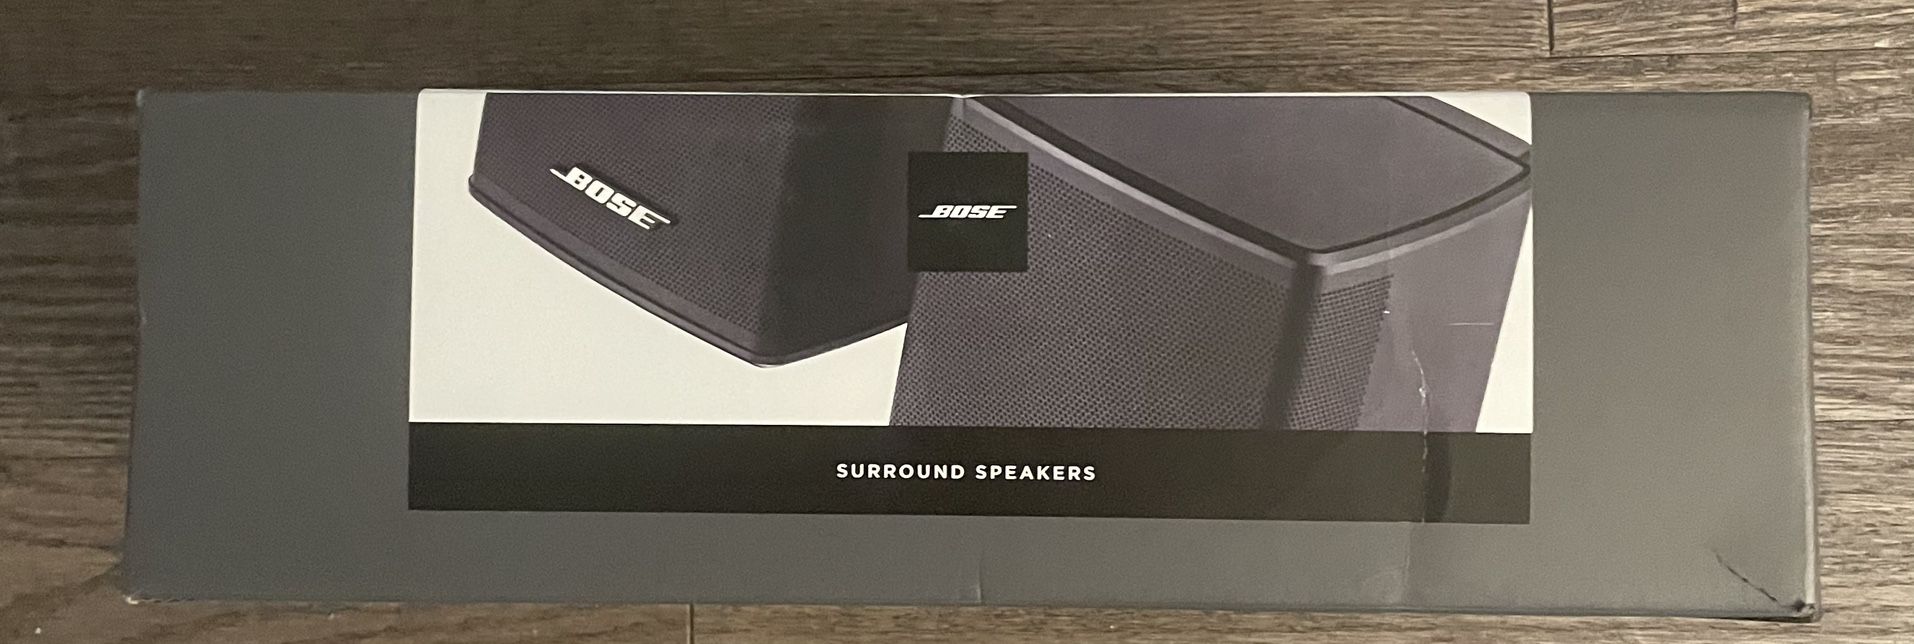 Bose - Wireless Surround Speakers for Home Theater (Pair) - Black